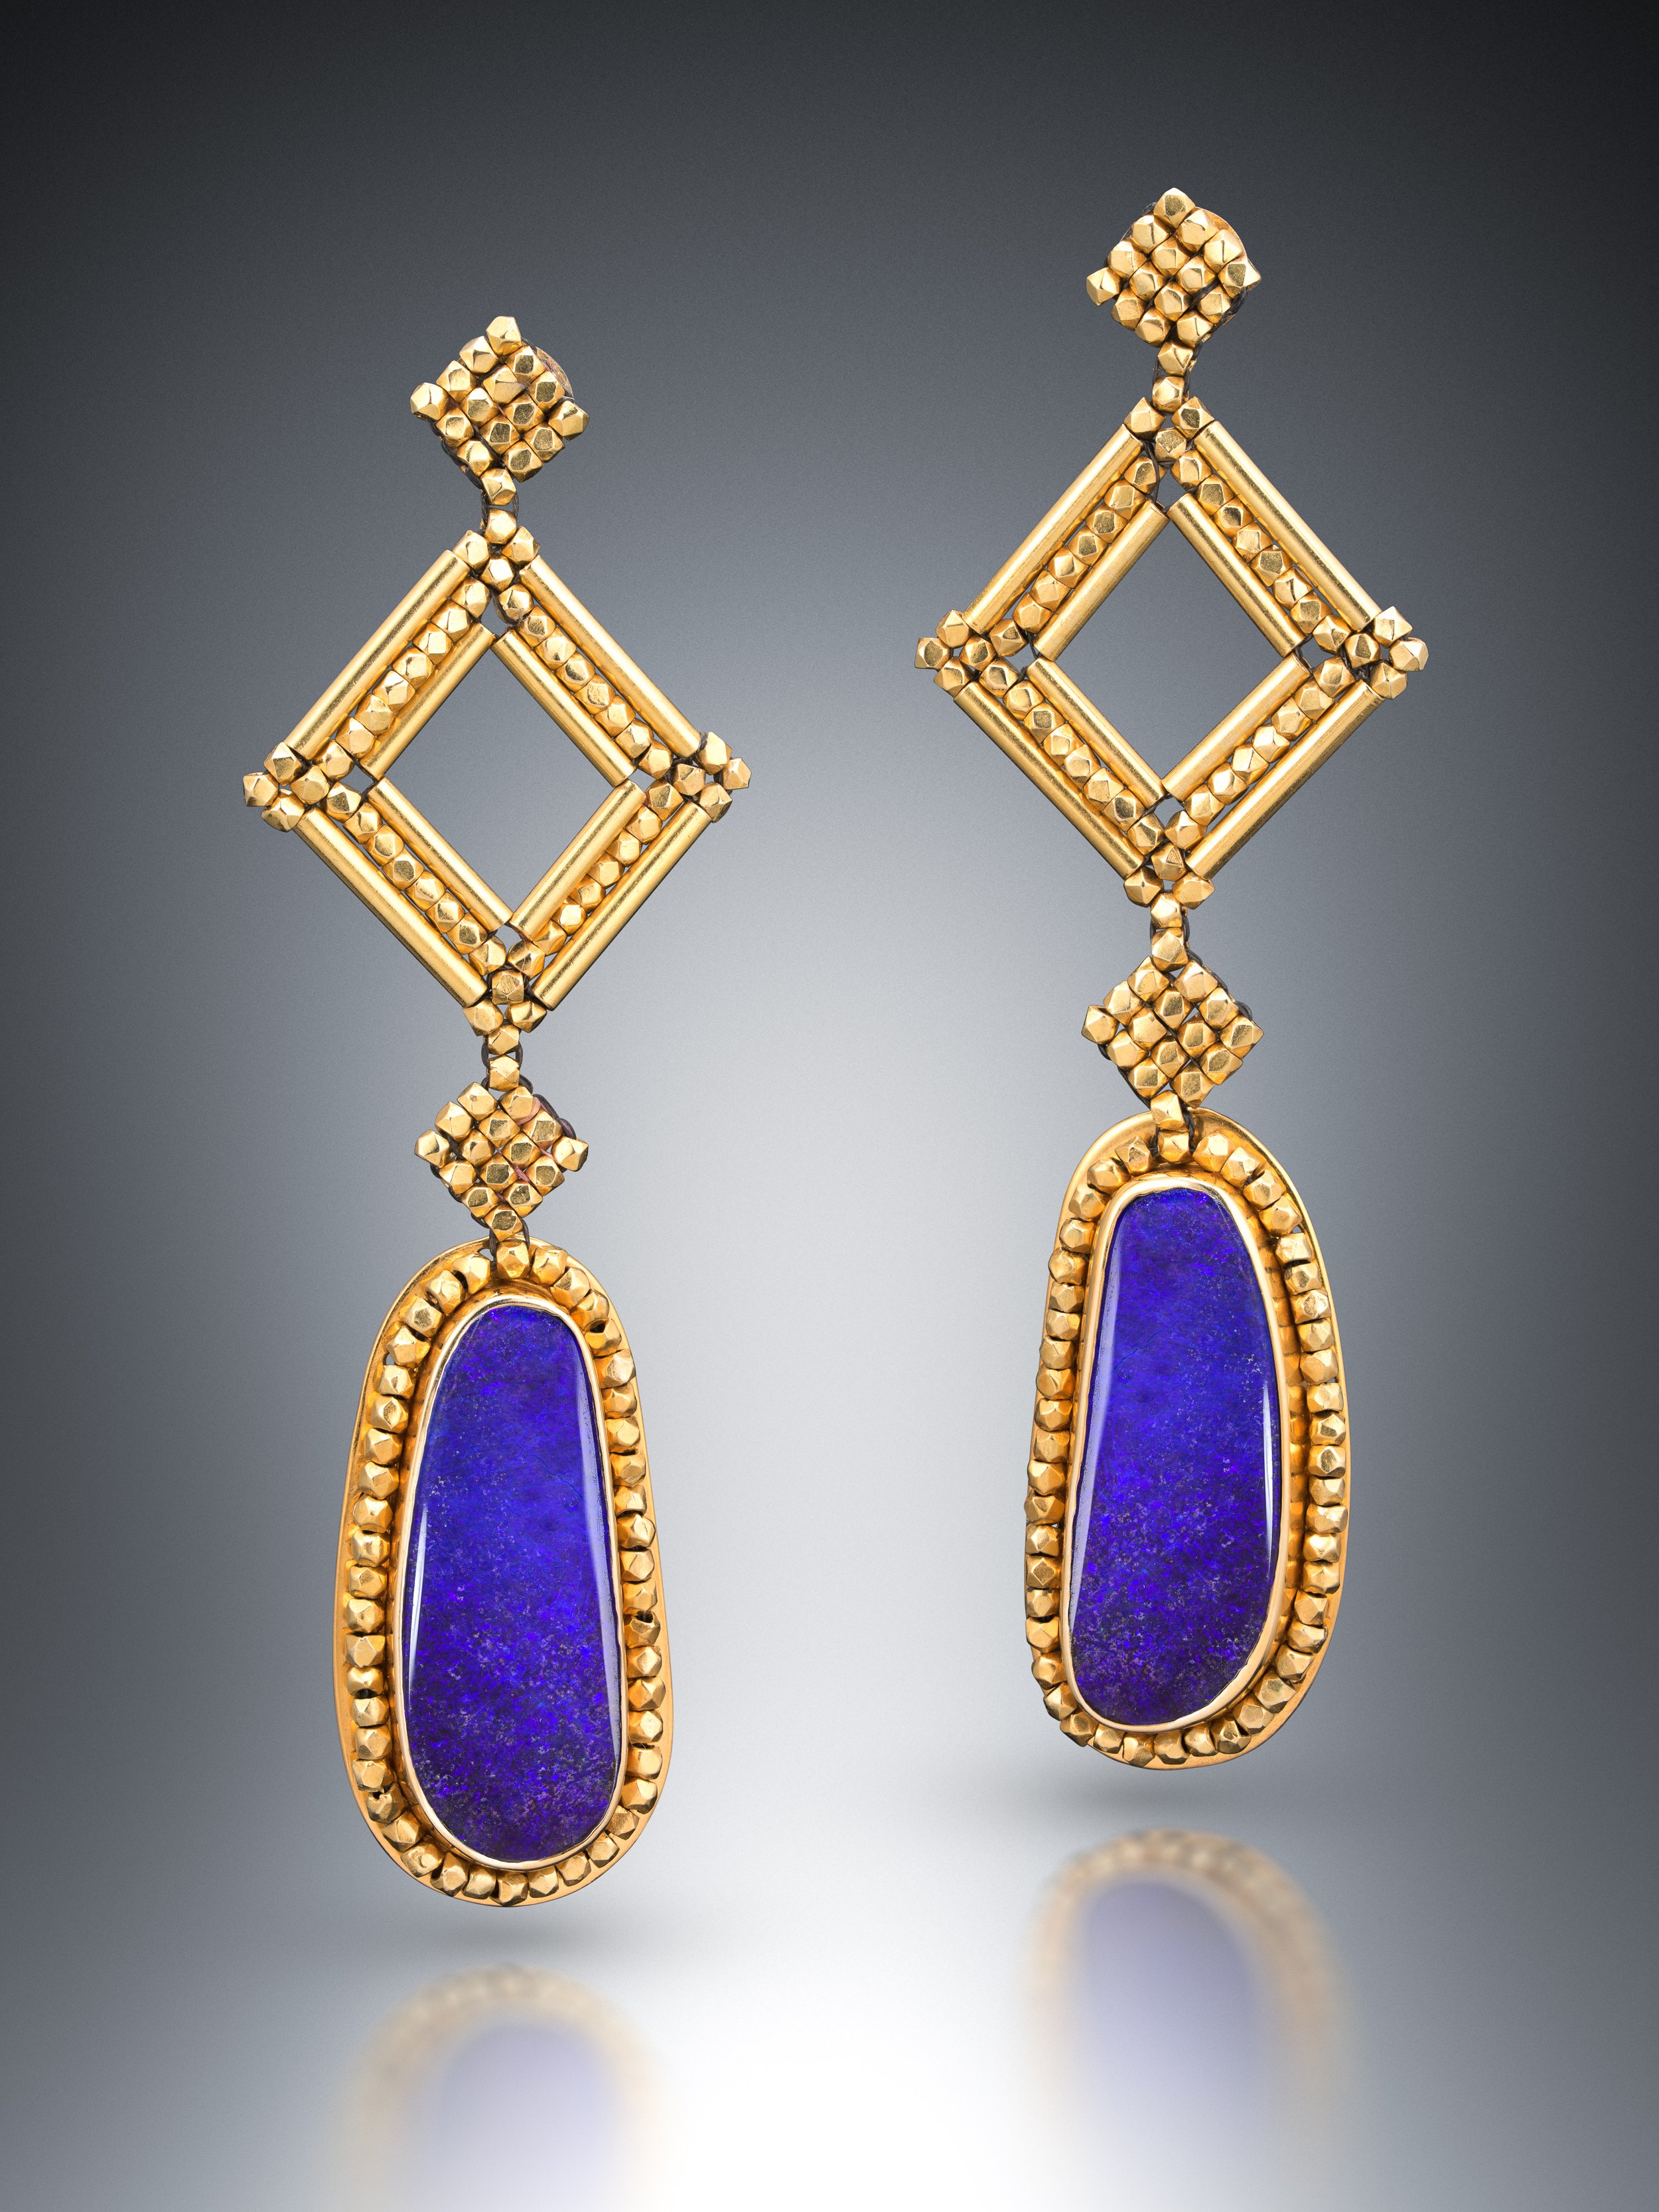 Purple Opal Earrings.  Hand woven and fabricated, these earrings are made of 18k gold, set with two purple Australian boulder opals.